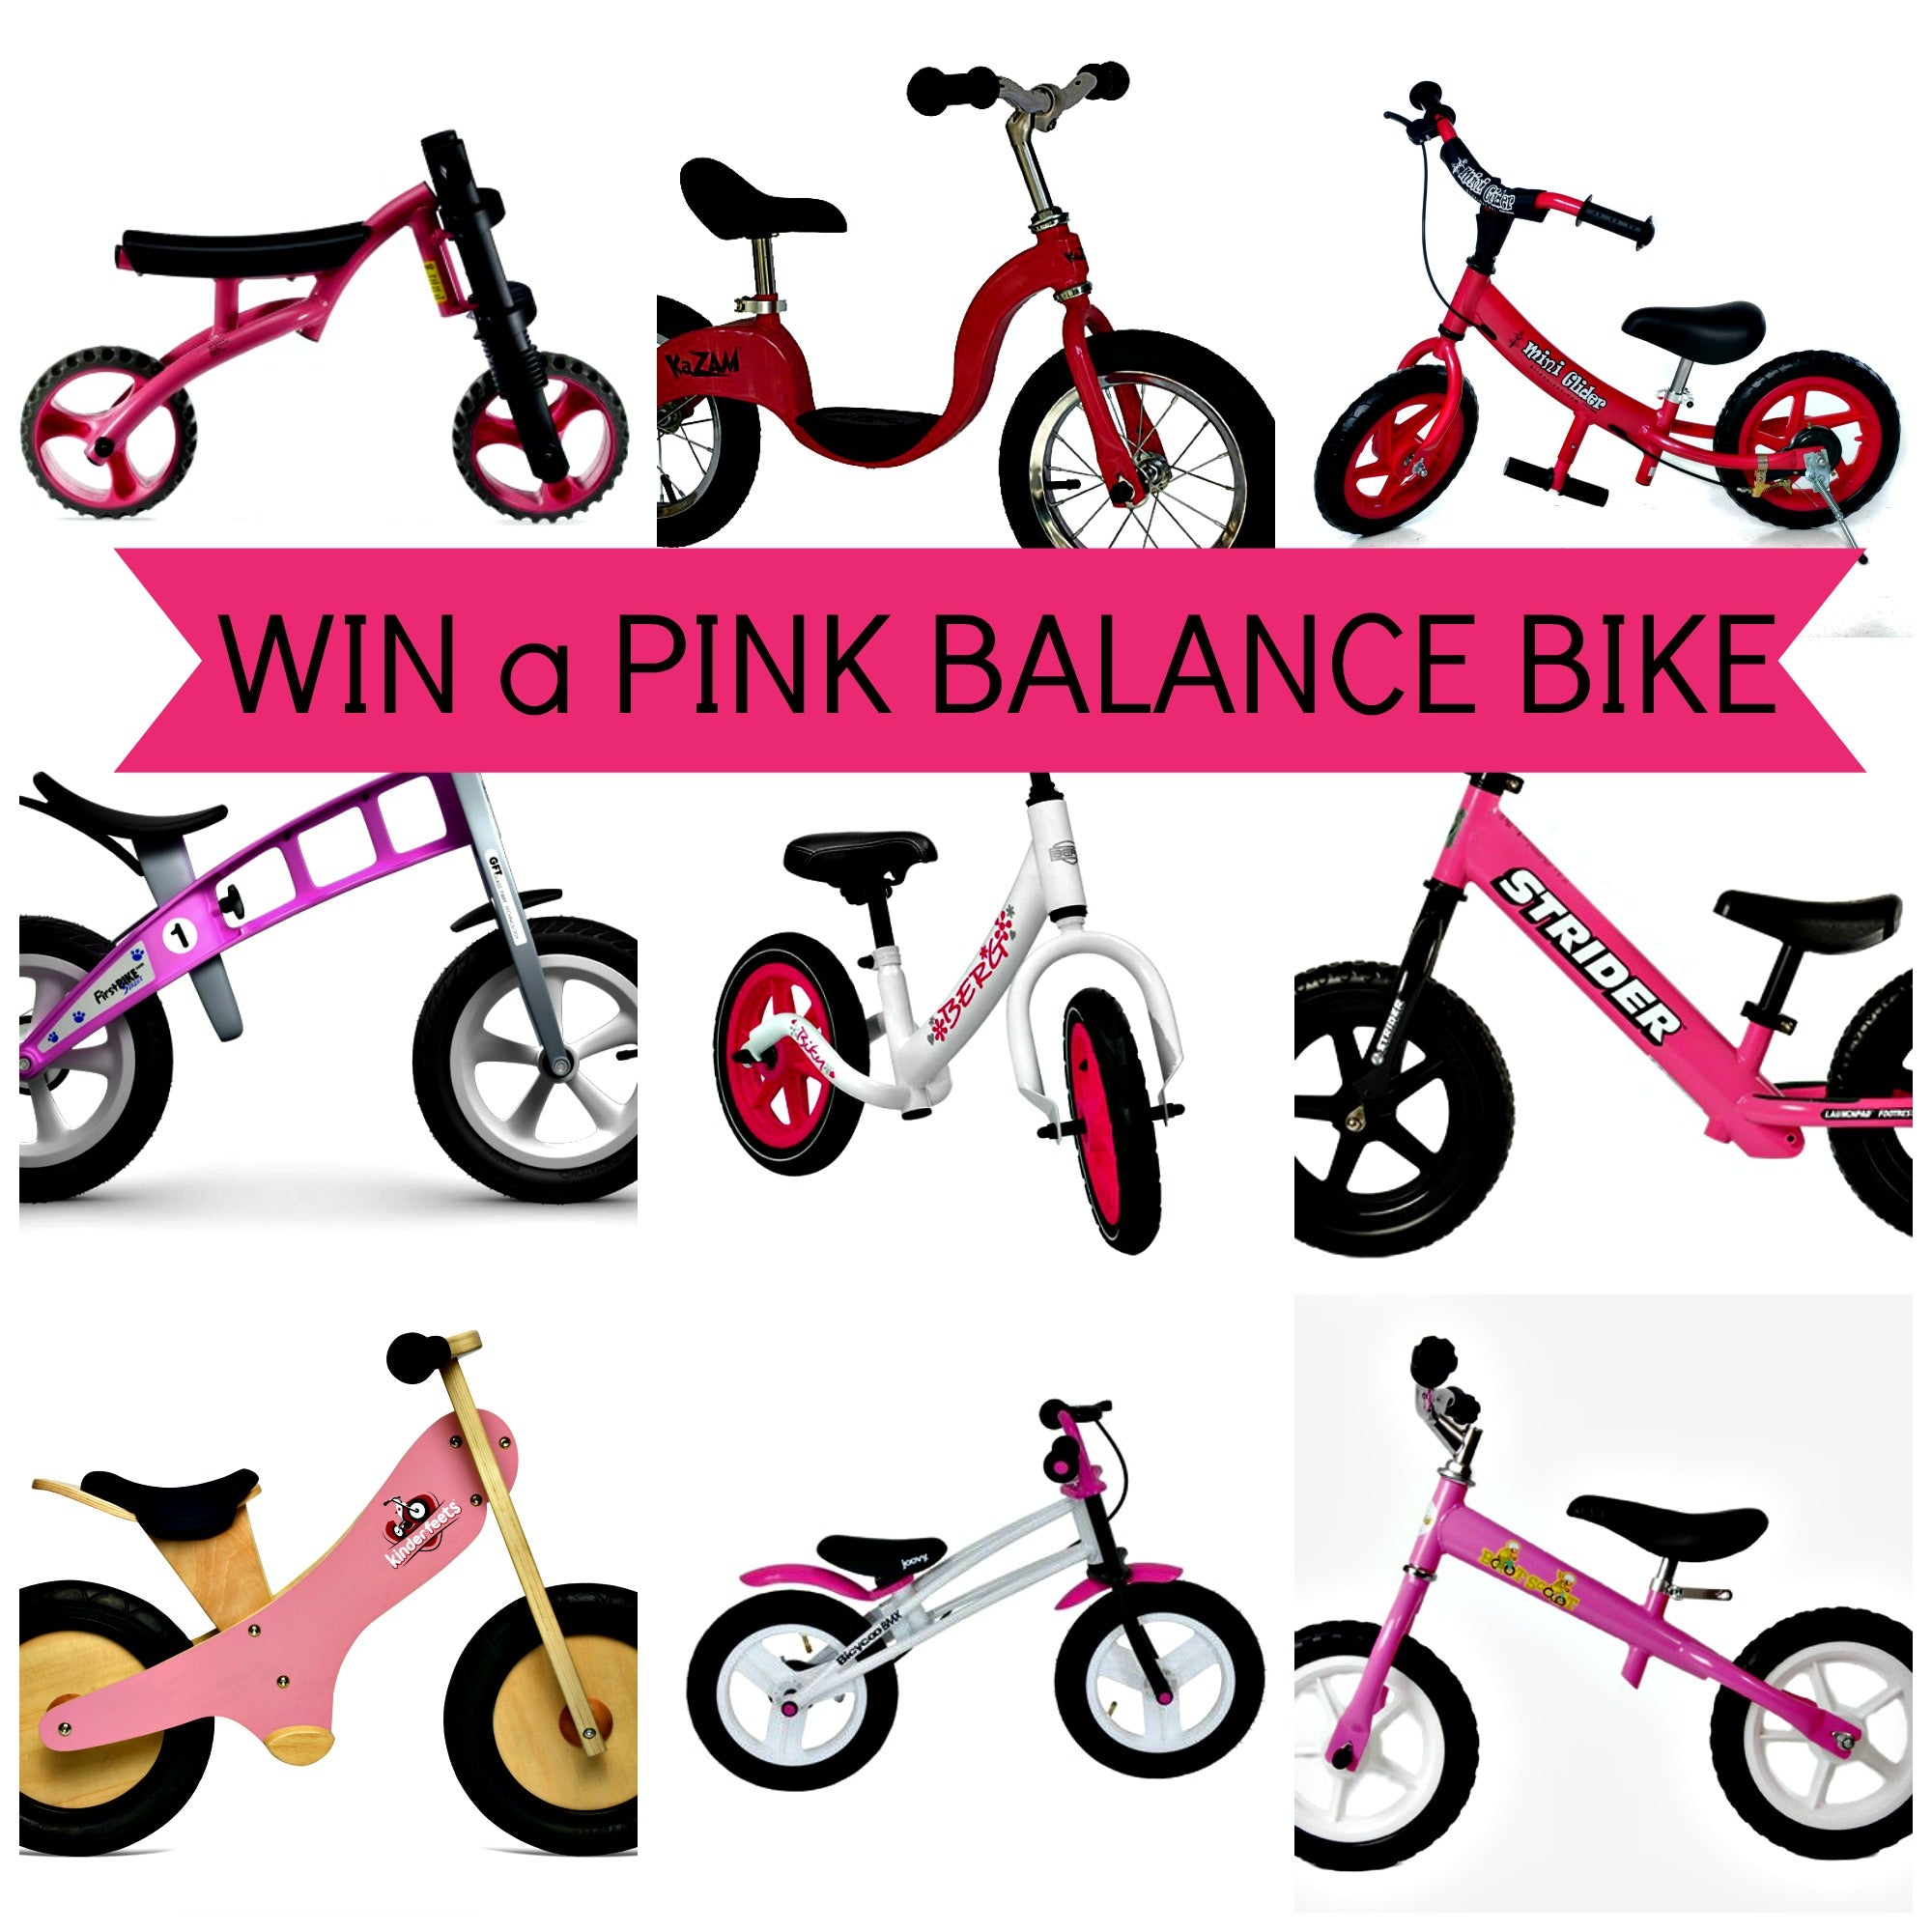 Enter to win your choice of any PINK BALANCE BIKE this holiday! Contest ends December 11, 2013. #tikesbikes